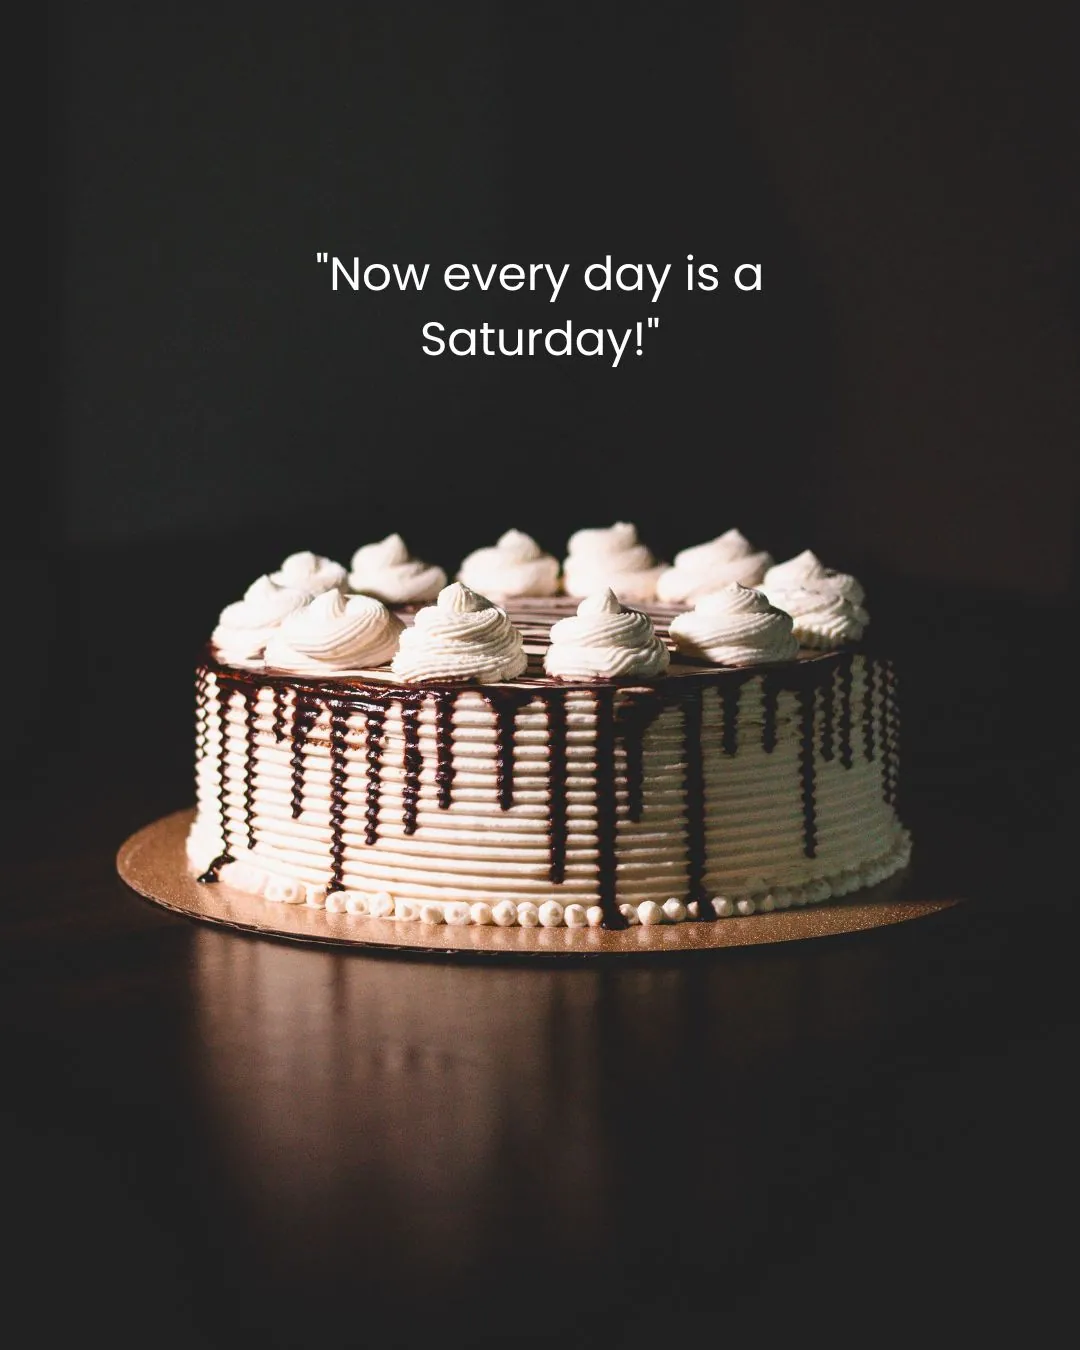 Funny Retirement Quotes For Cakes